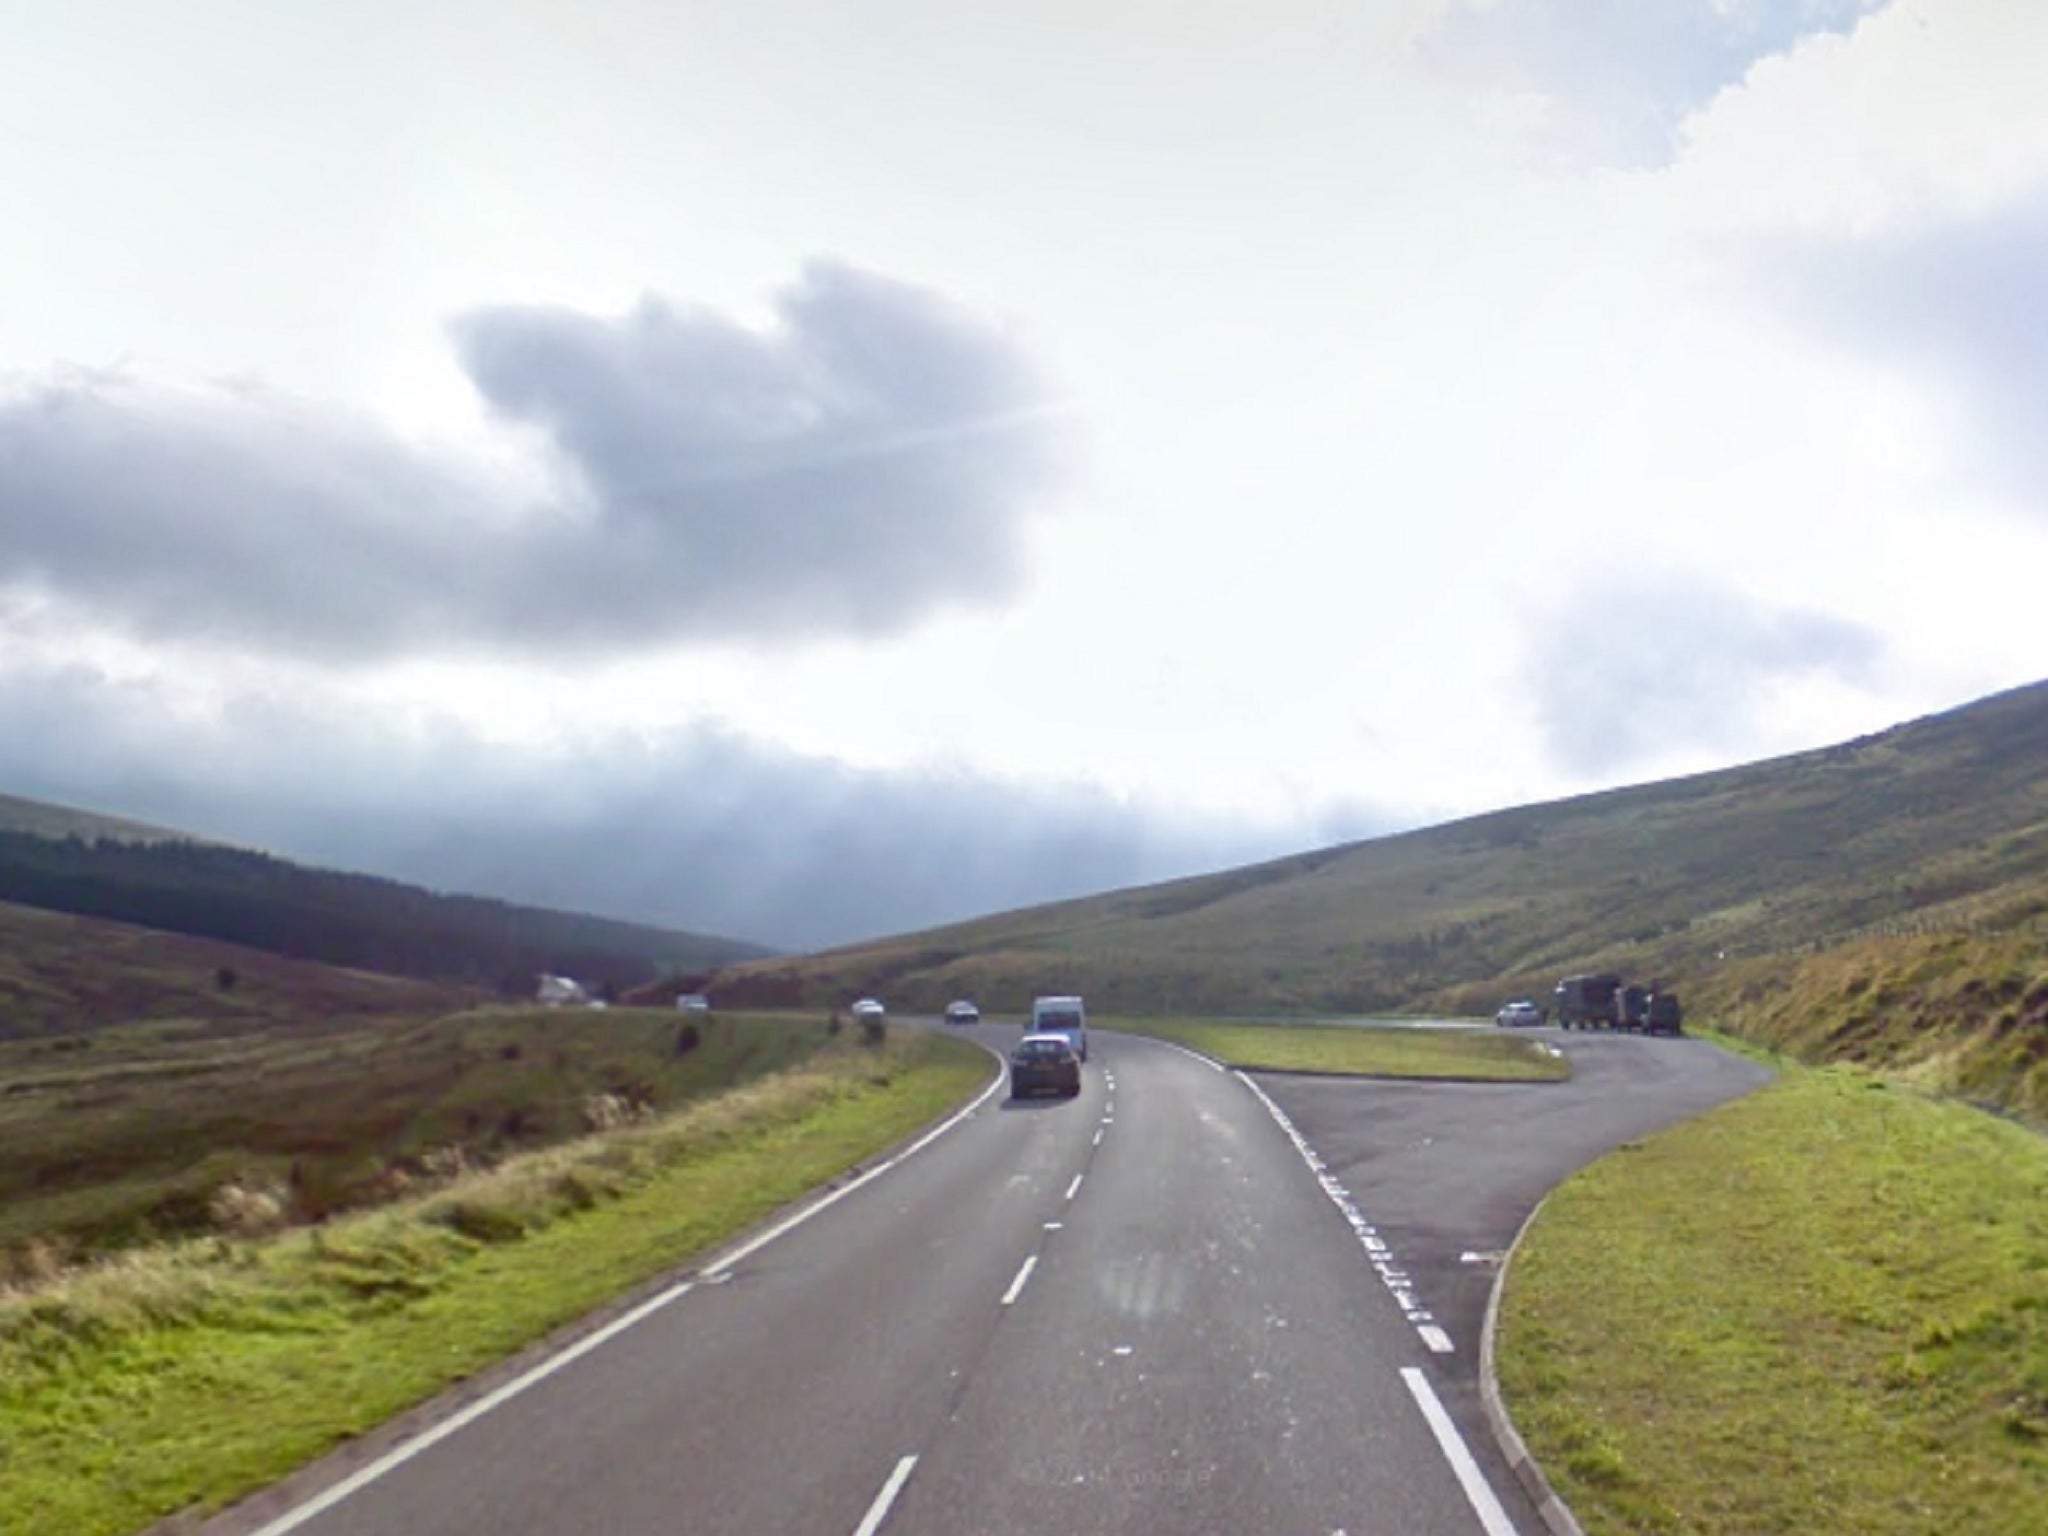 The fatal accident happened on the A470 in Wales